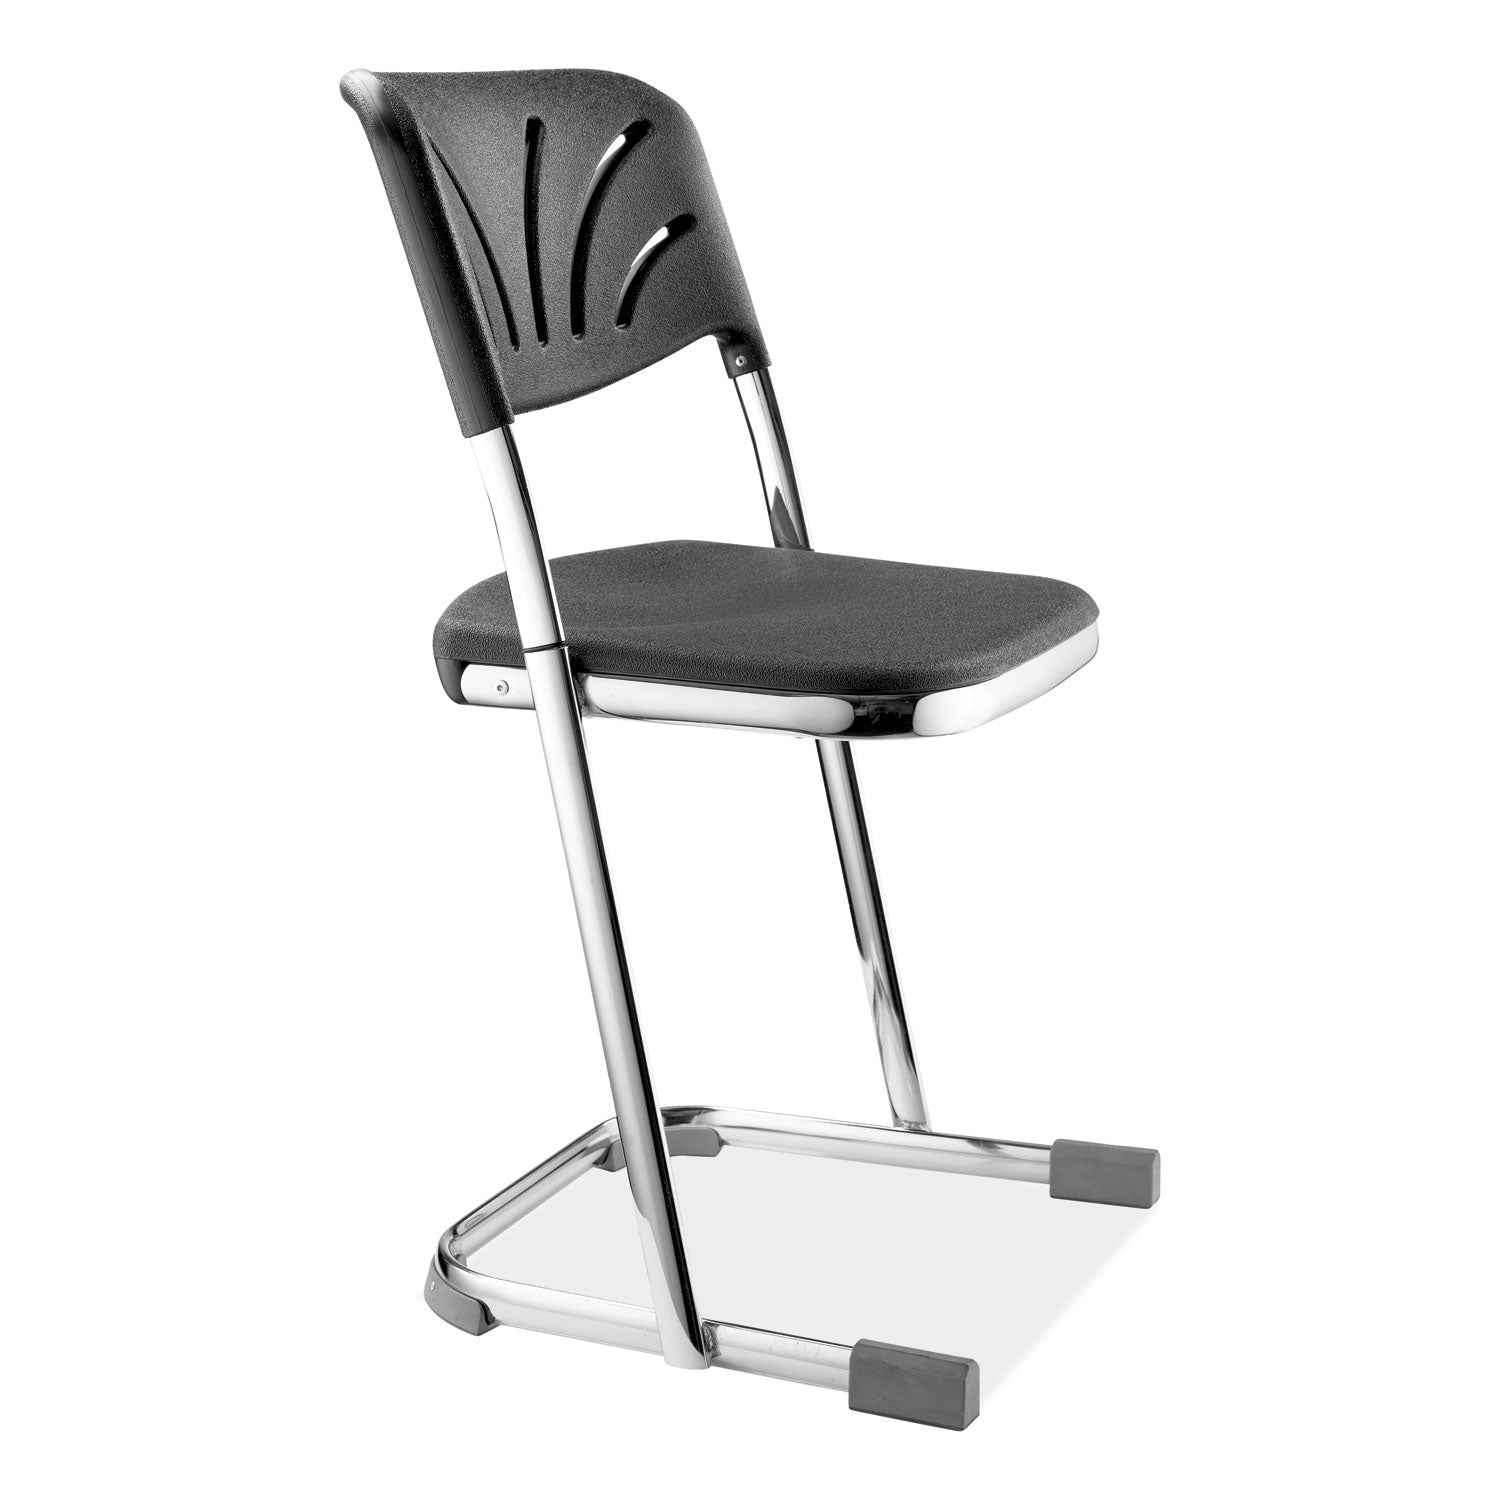 6600-series-elephant-z-stool-with-backrest-supports-500-lb-18-seat-ht-black-seat-back-chrome-frameships-in-1-3-bus-days_nps6618b - 4